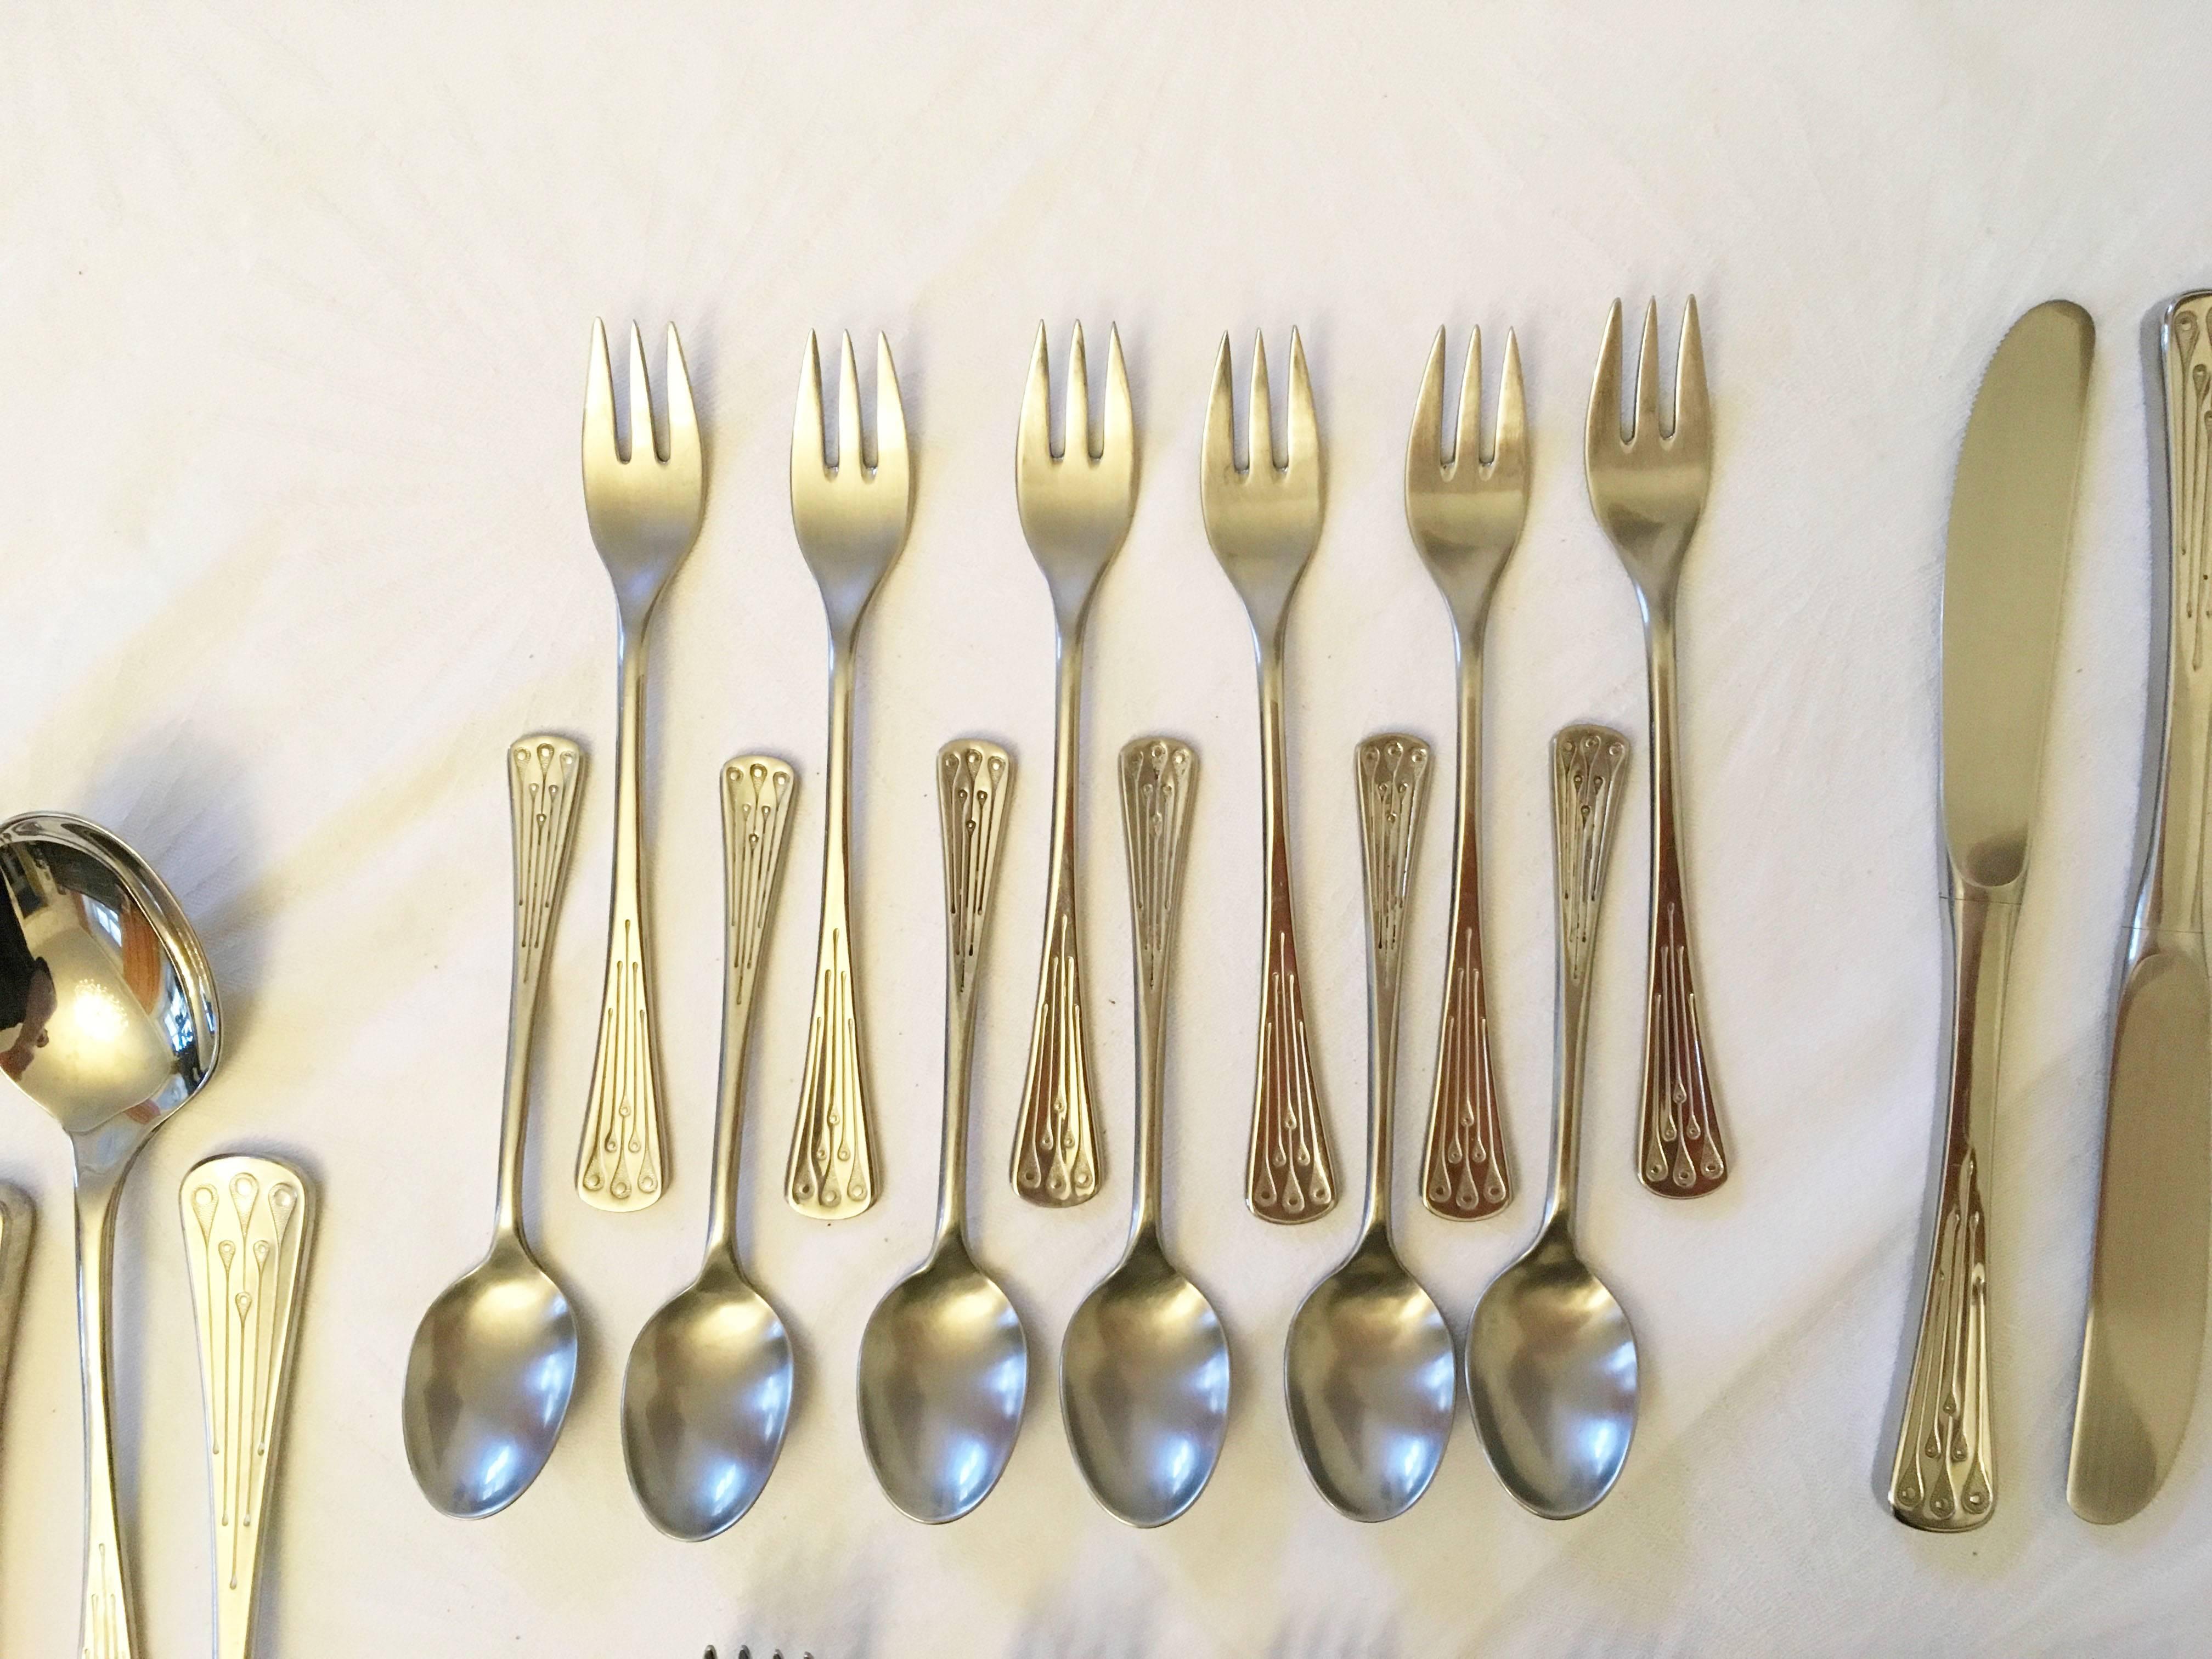 Flatware, Cutlery Set by Berndorf Model 9100, Charleston In Good Condition For Sale In Vienna, AT